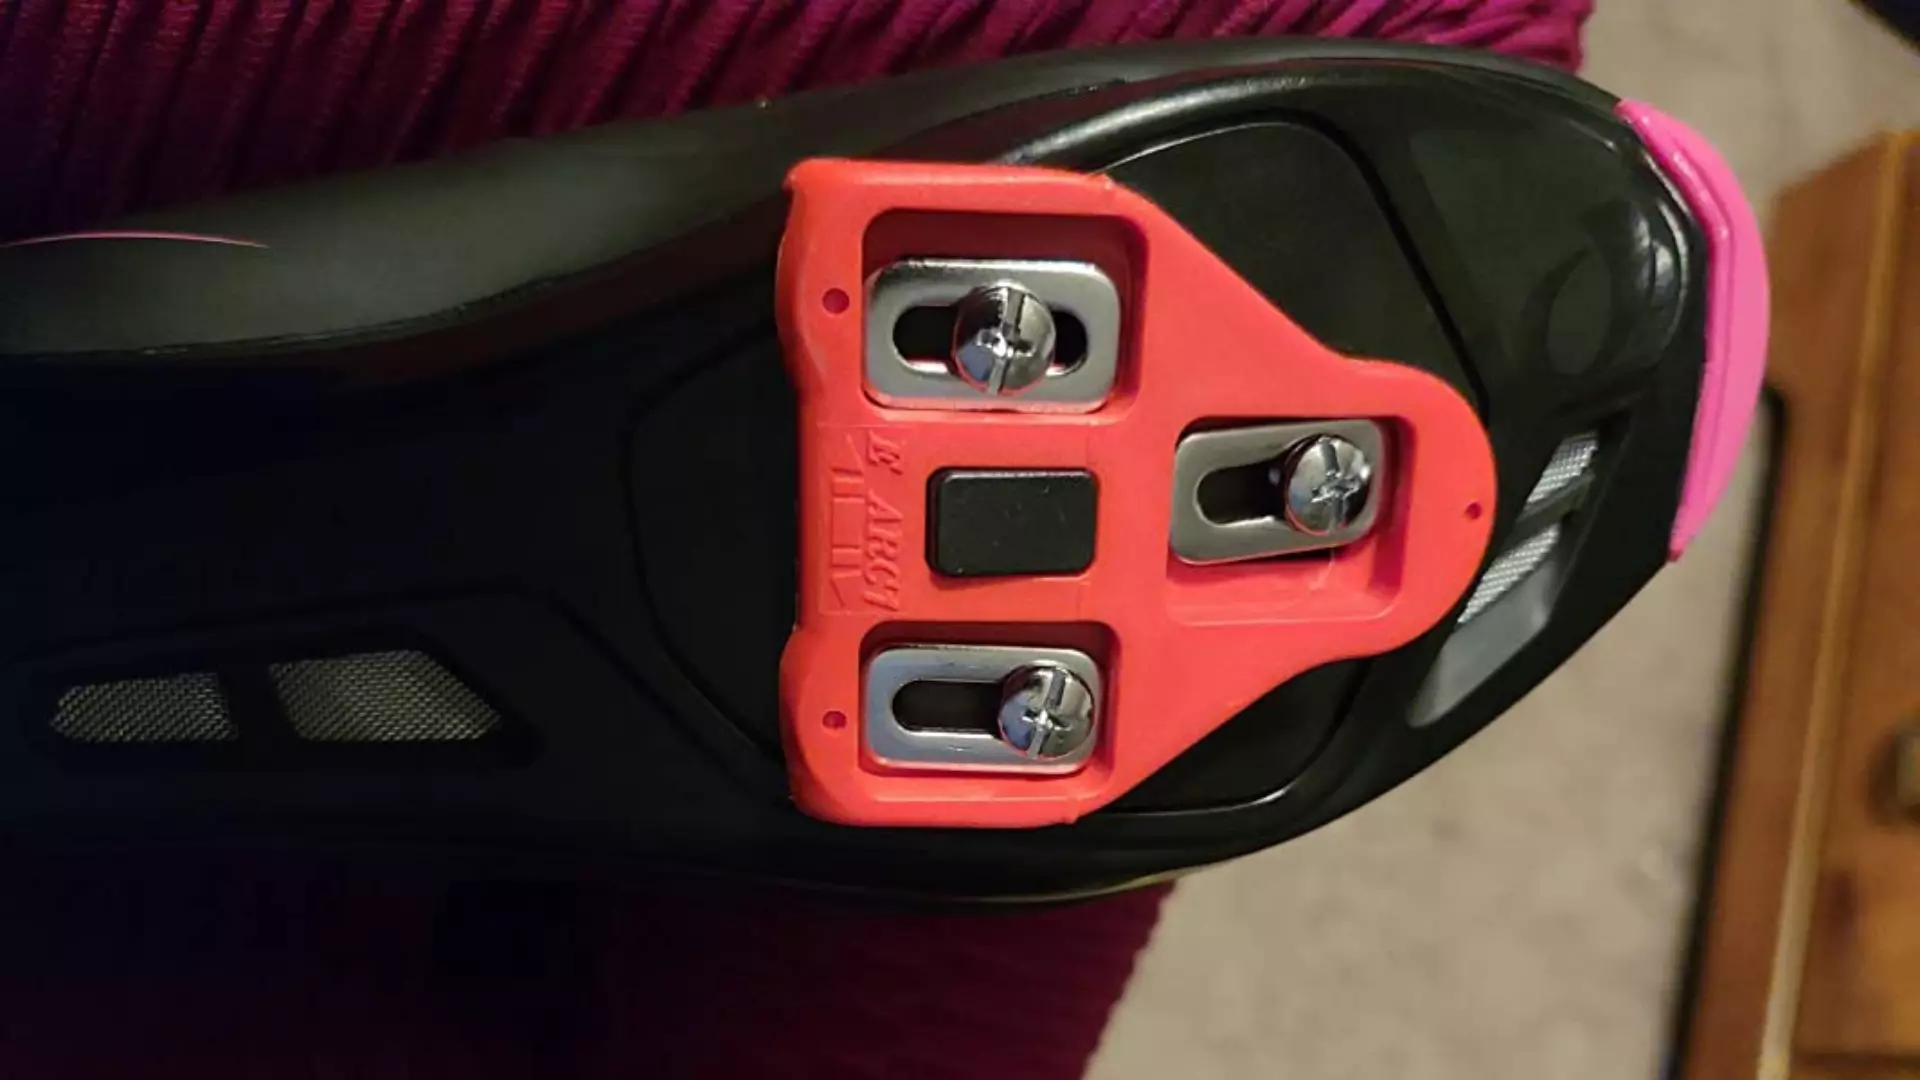 BV Bike Cleats Review